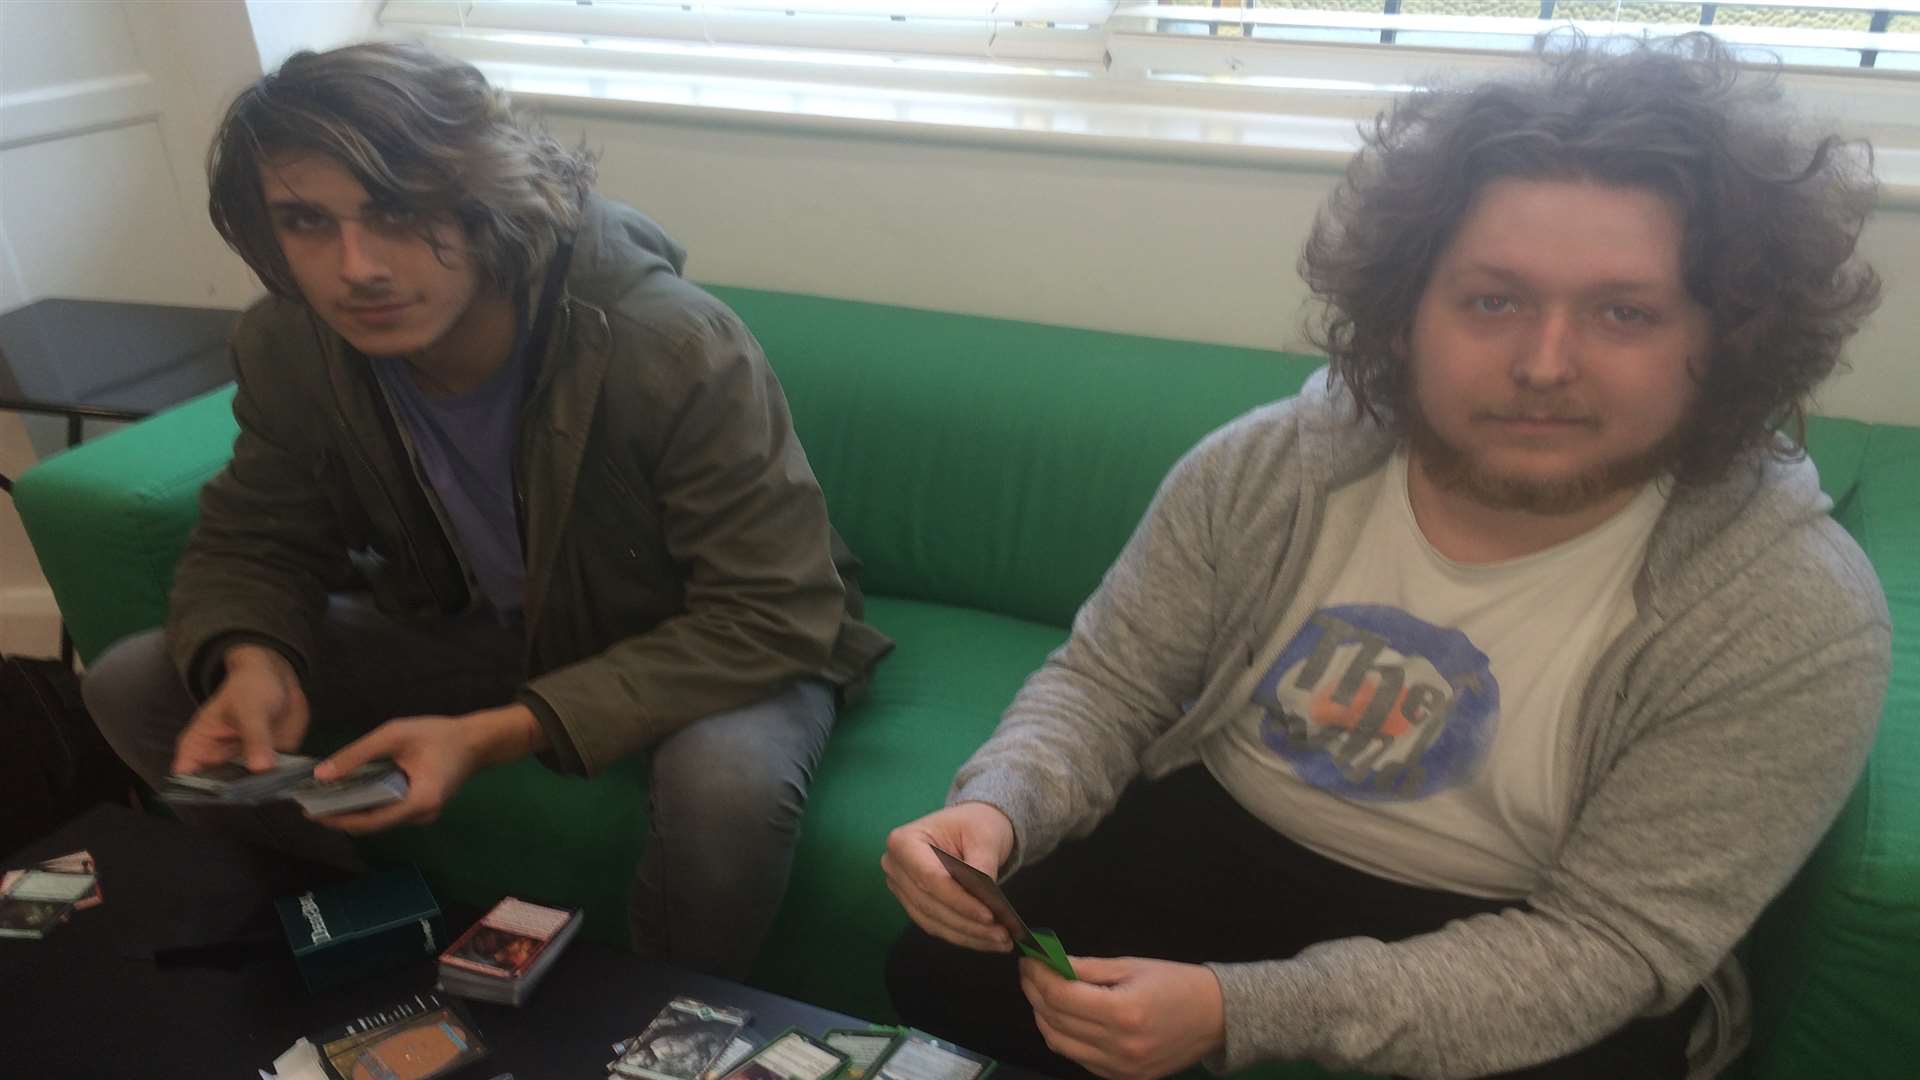 The Mug and Meeple gamer cafe. Luca Fallon, left, and William Order play a card game.